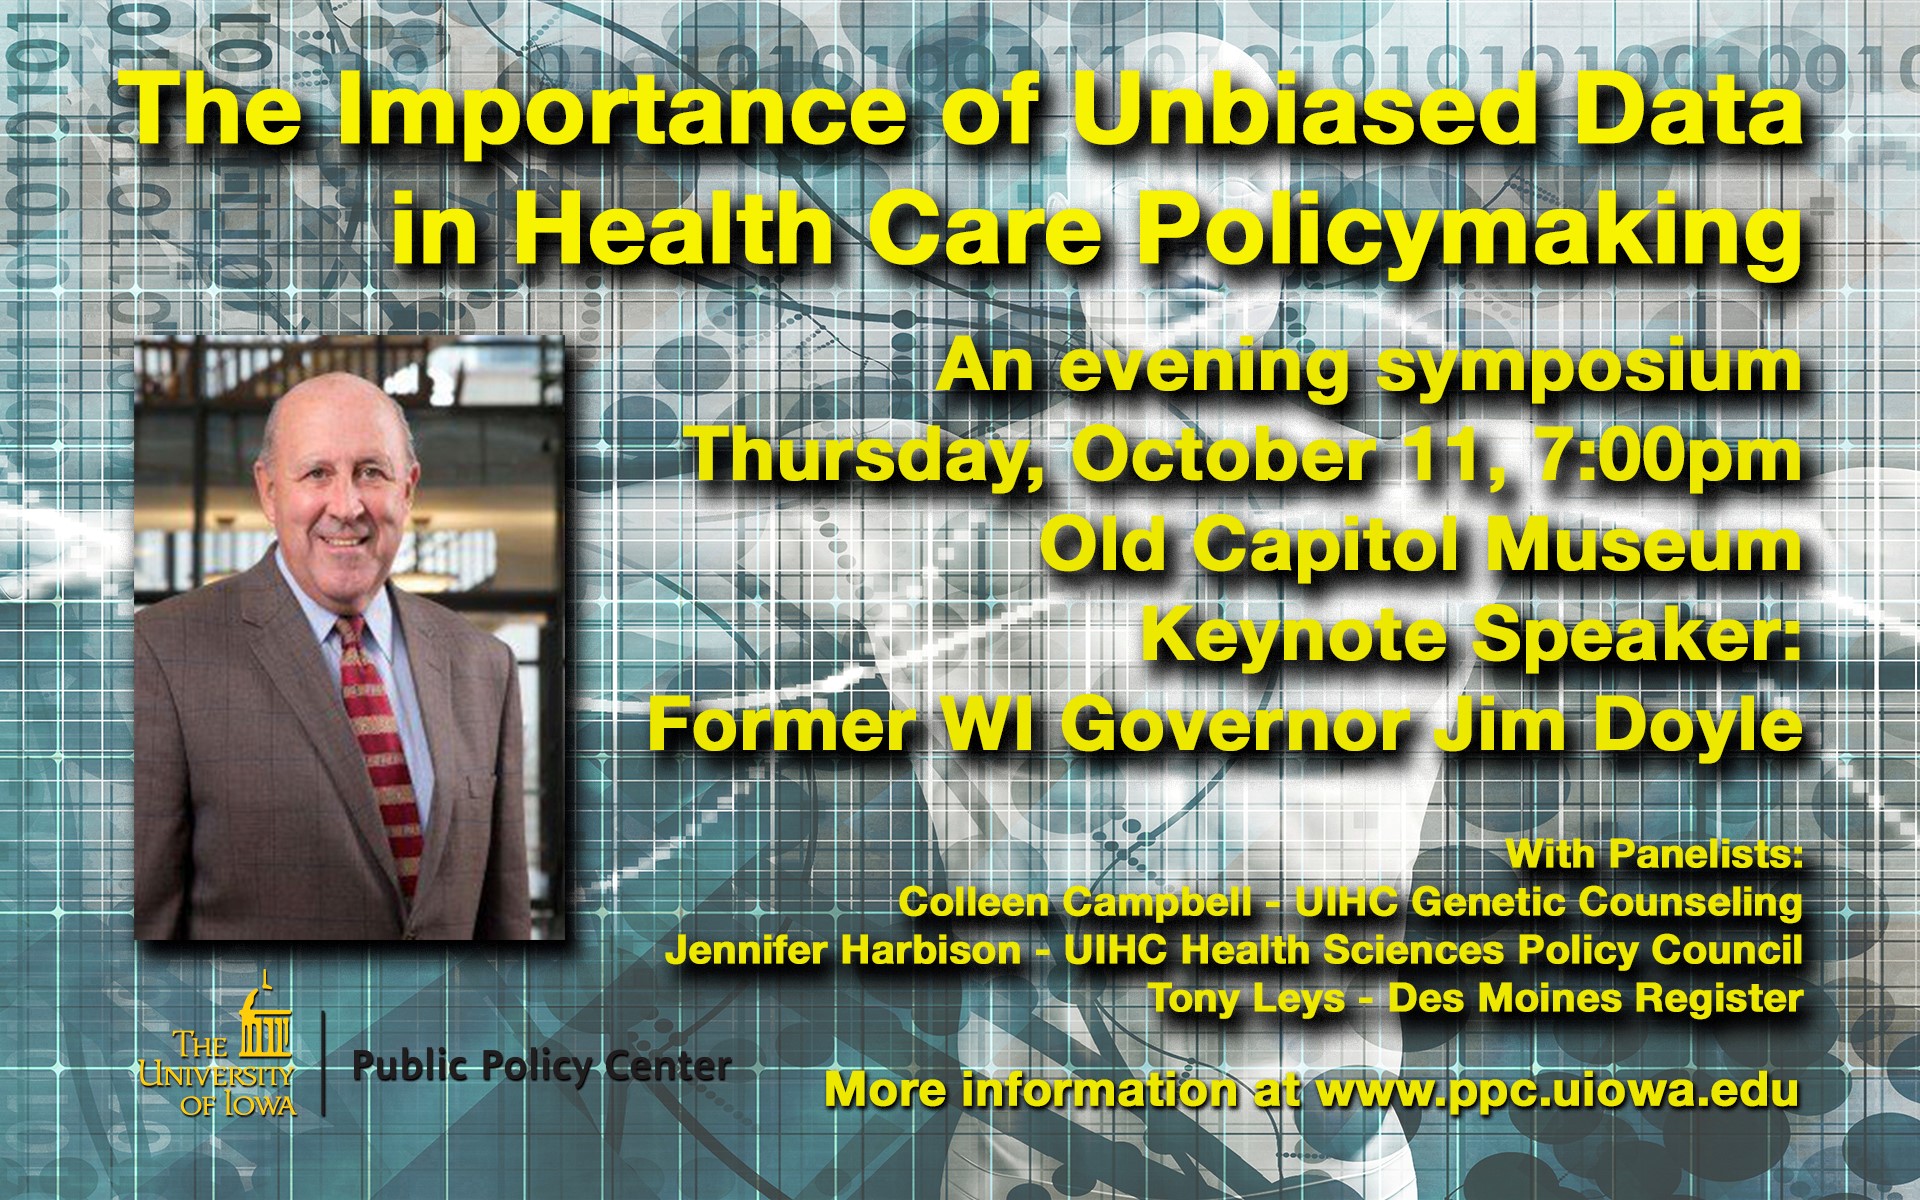 The Importance of Unbiased Data in health care policymaking. An evening symposium.  Thursday, October 11, 7 p.m., Old Capitol Museum, Keynote speaker: Former WI Governor Jim Doyle with panelists: Colleen Campbell - UIHC Genetic Counseling, Jennifer Harbison - UIHC Health Sciences Policy Council, and Tony Leys - Des Moines Register; more information - www.ppc.uiowa.edu 